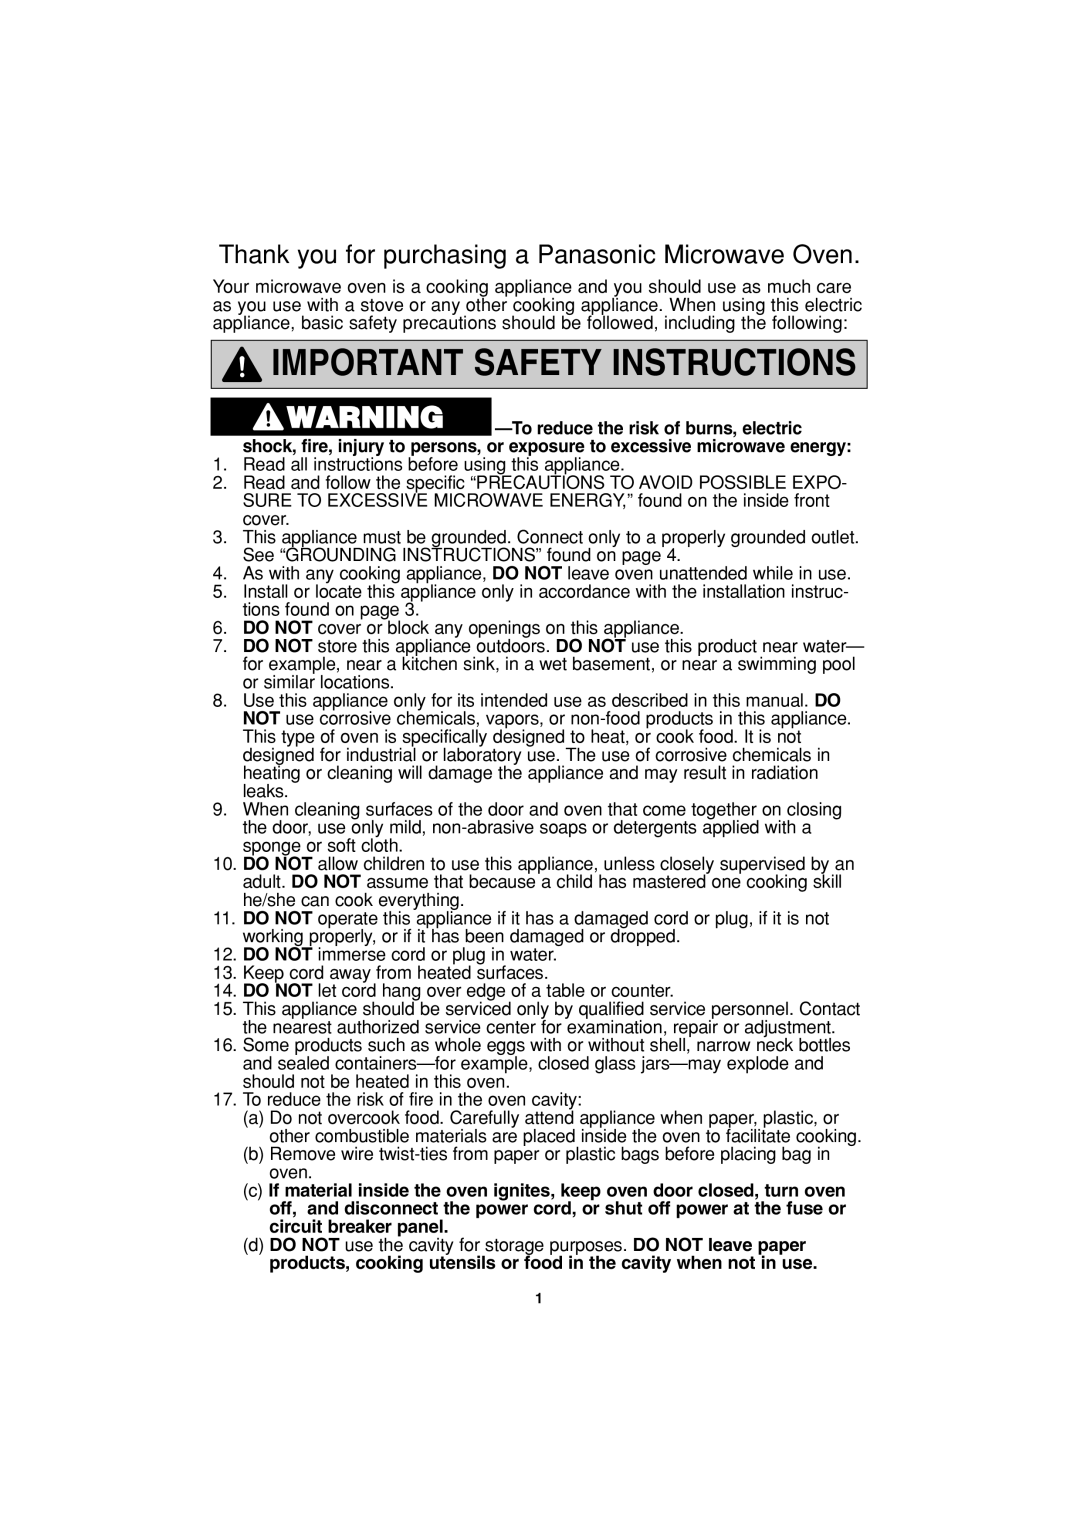 Panasonic NN-S763, NN-T763, NN-S963 Important Safety Instructions, Thank you for purchasing a Panasonic Microwave Oven 